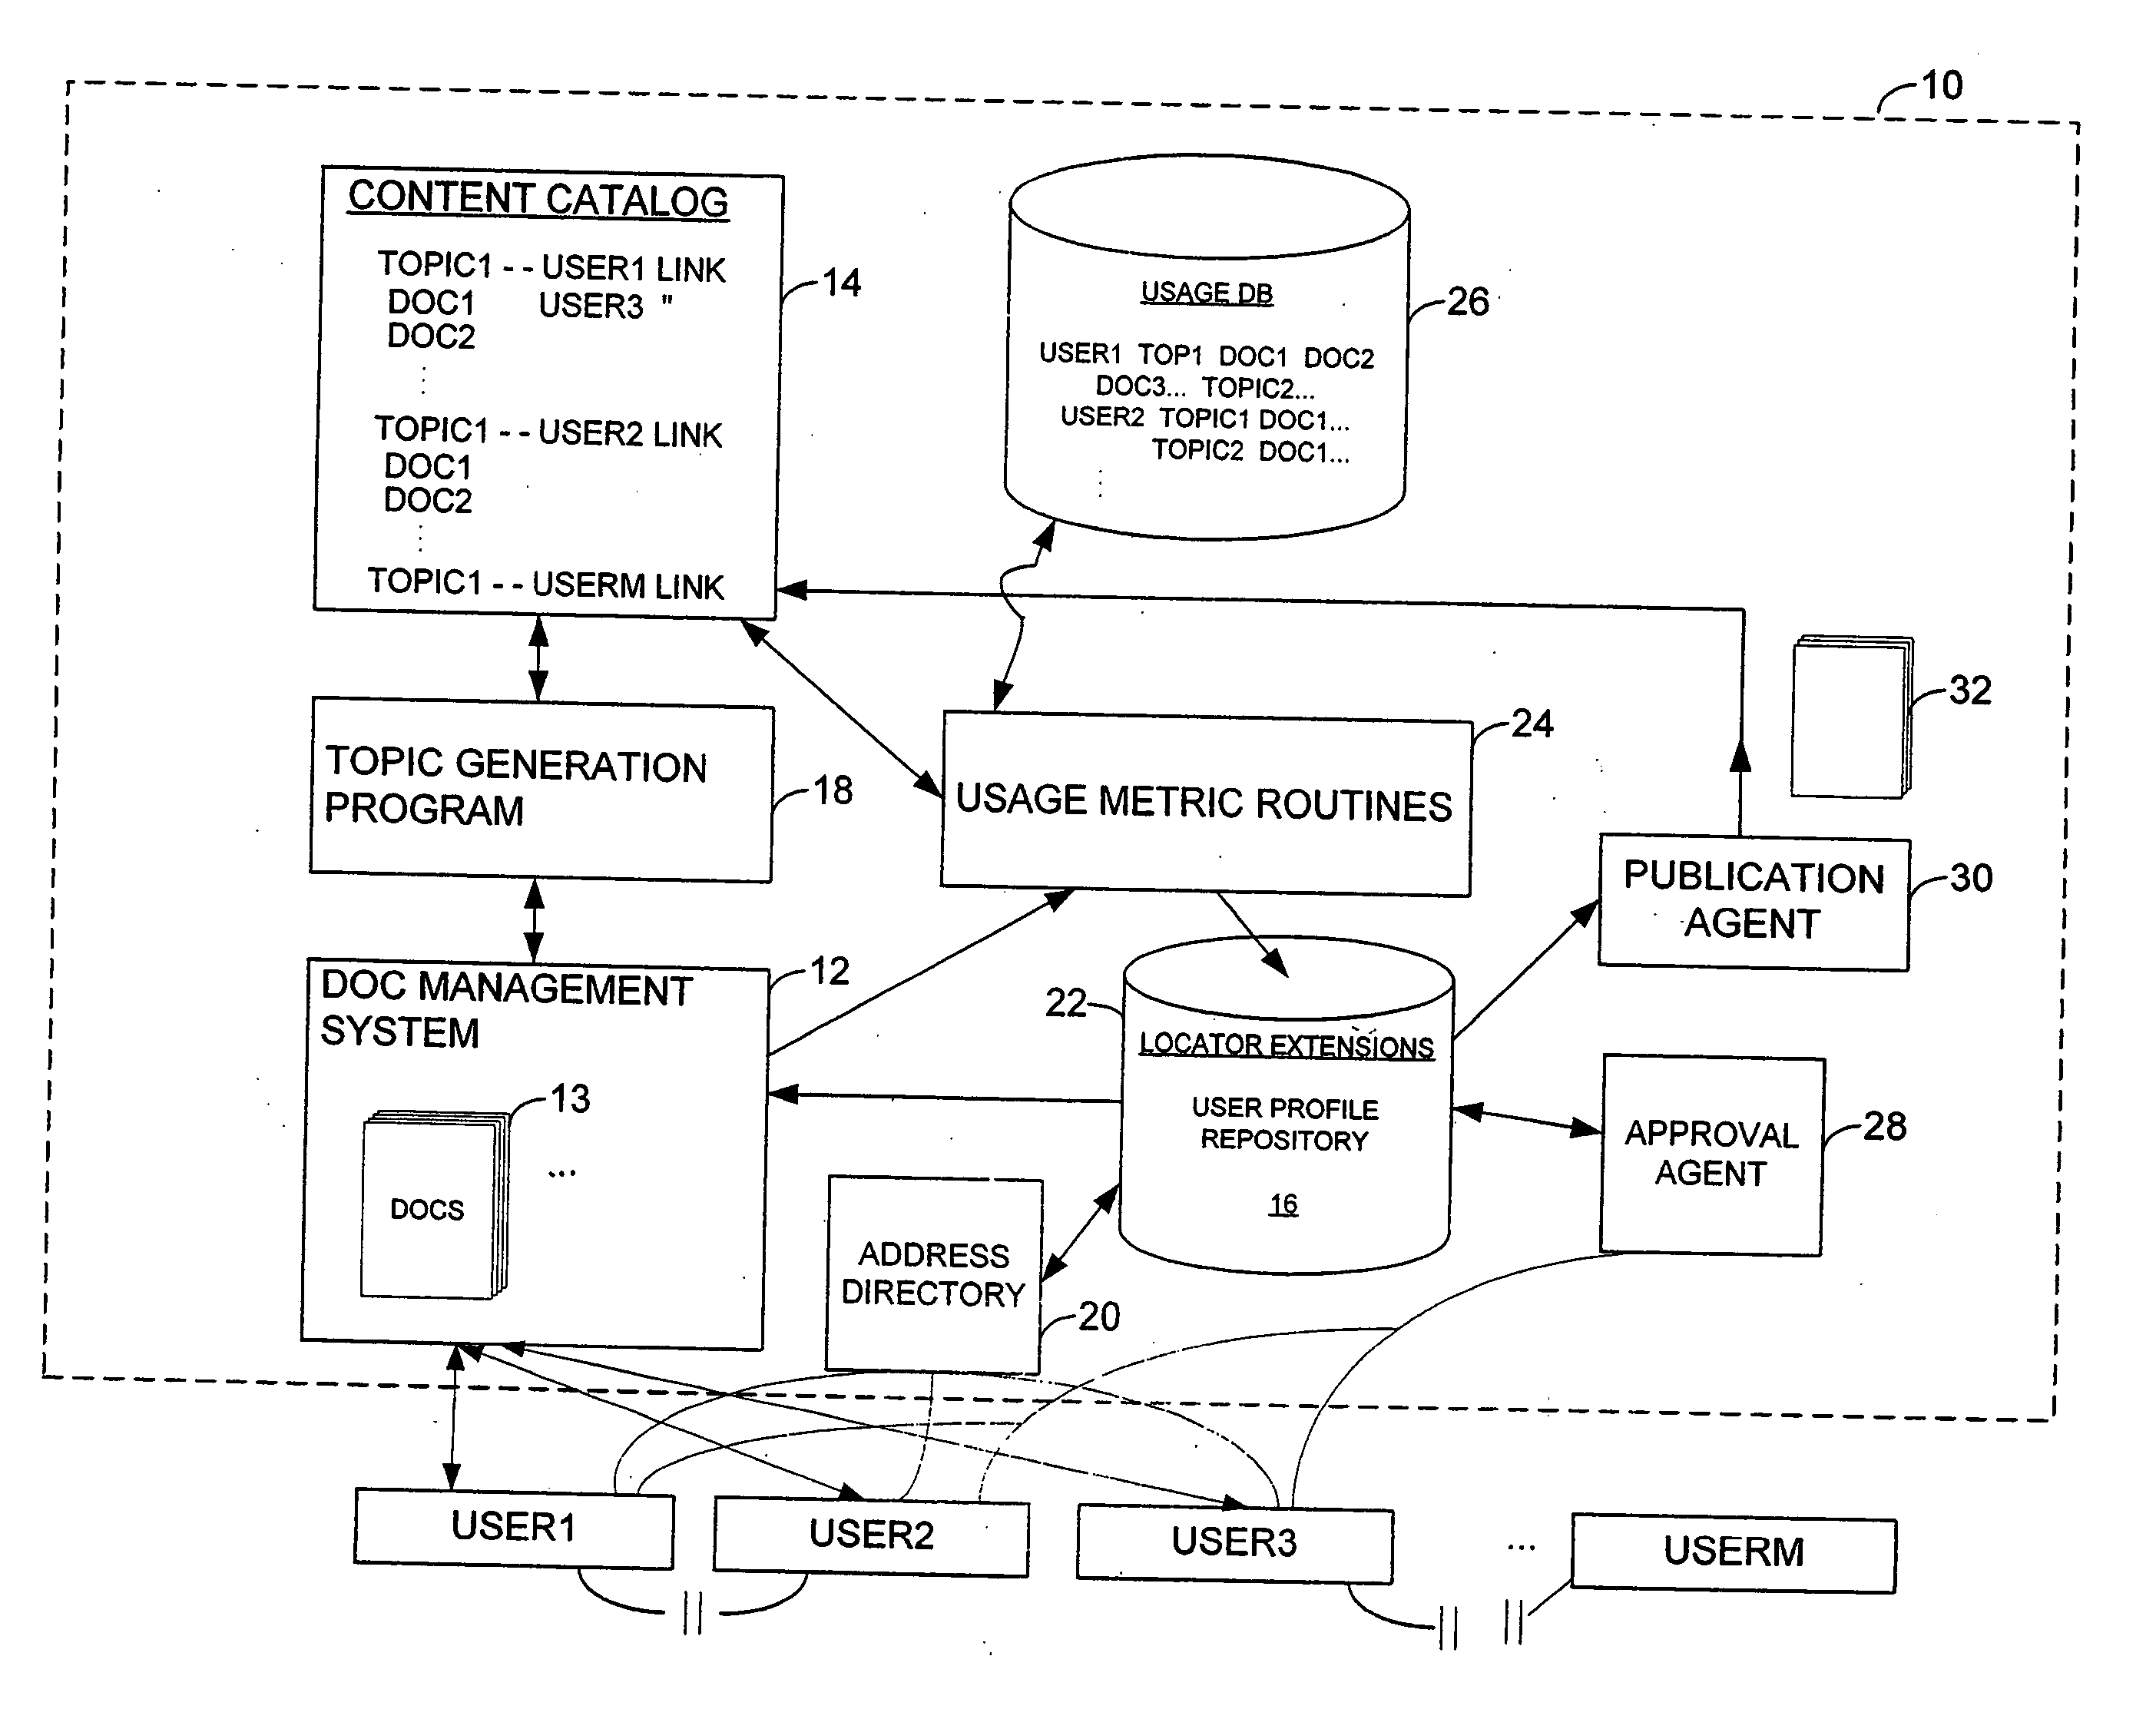 Method and system for profiling users based on their relationships with content topics